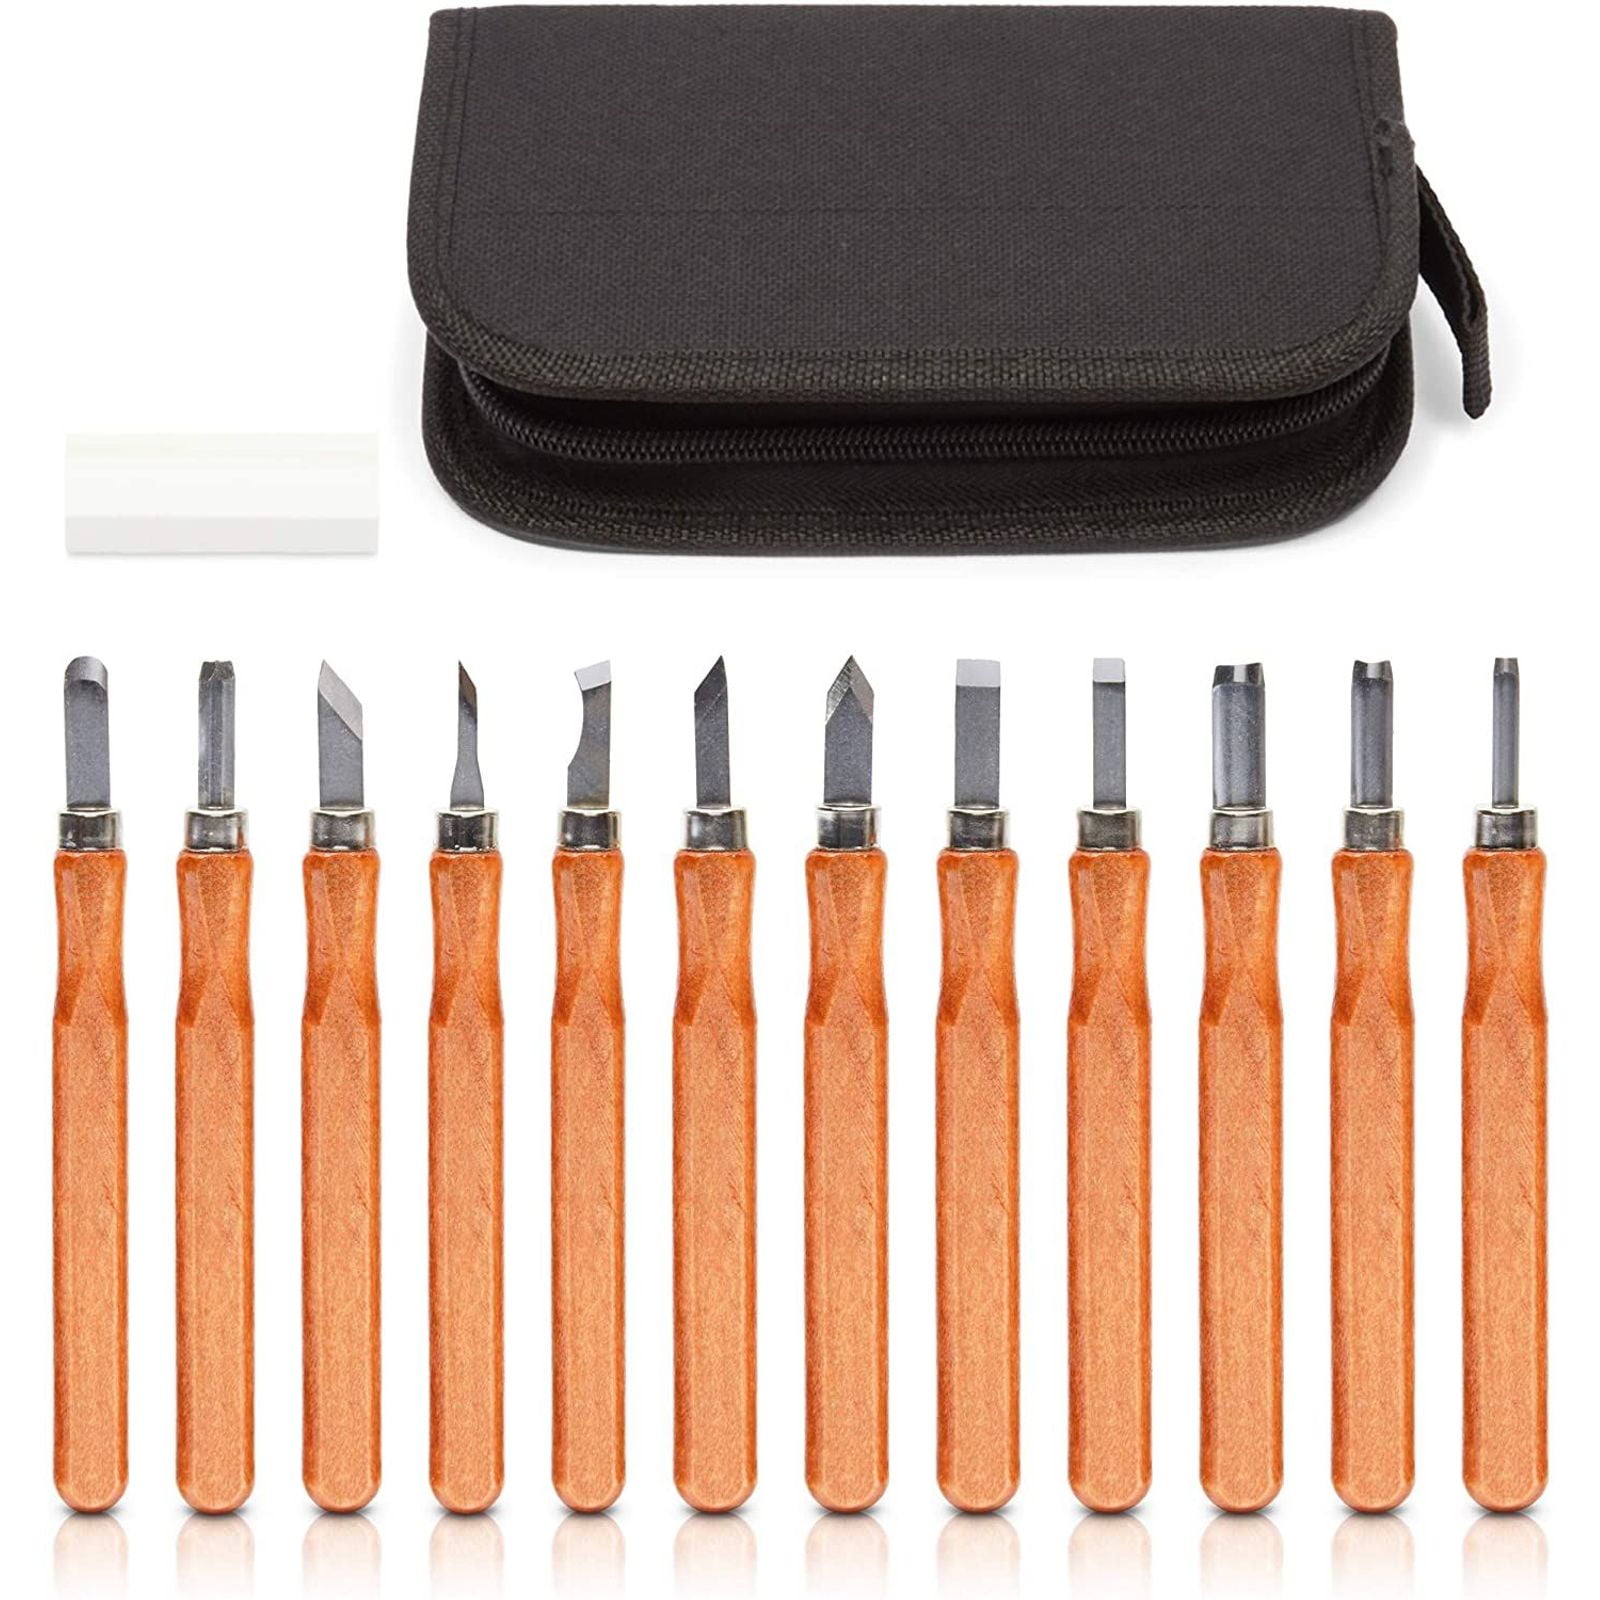 12Pcs Wood Carving Set Professional Wood Carving Tool with Whetstone and Storage Bag for Wood Fruit DIY Carving Sculpture and Wax Carving Great for Beginners